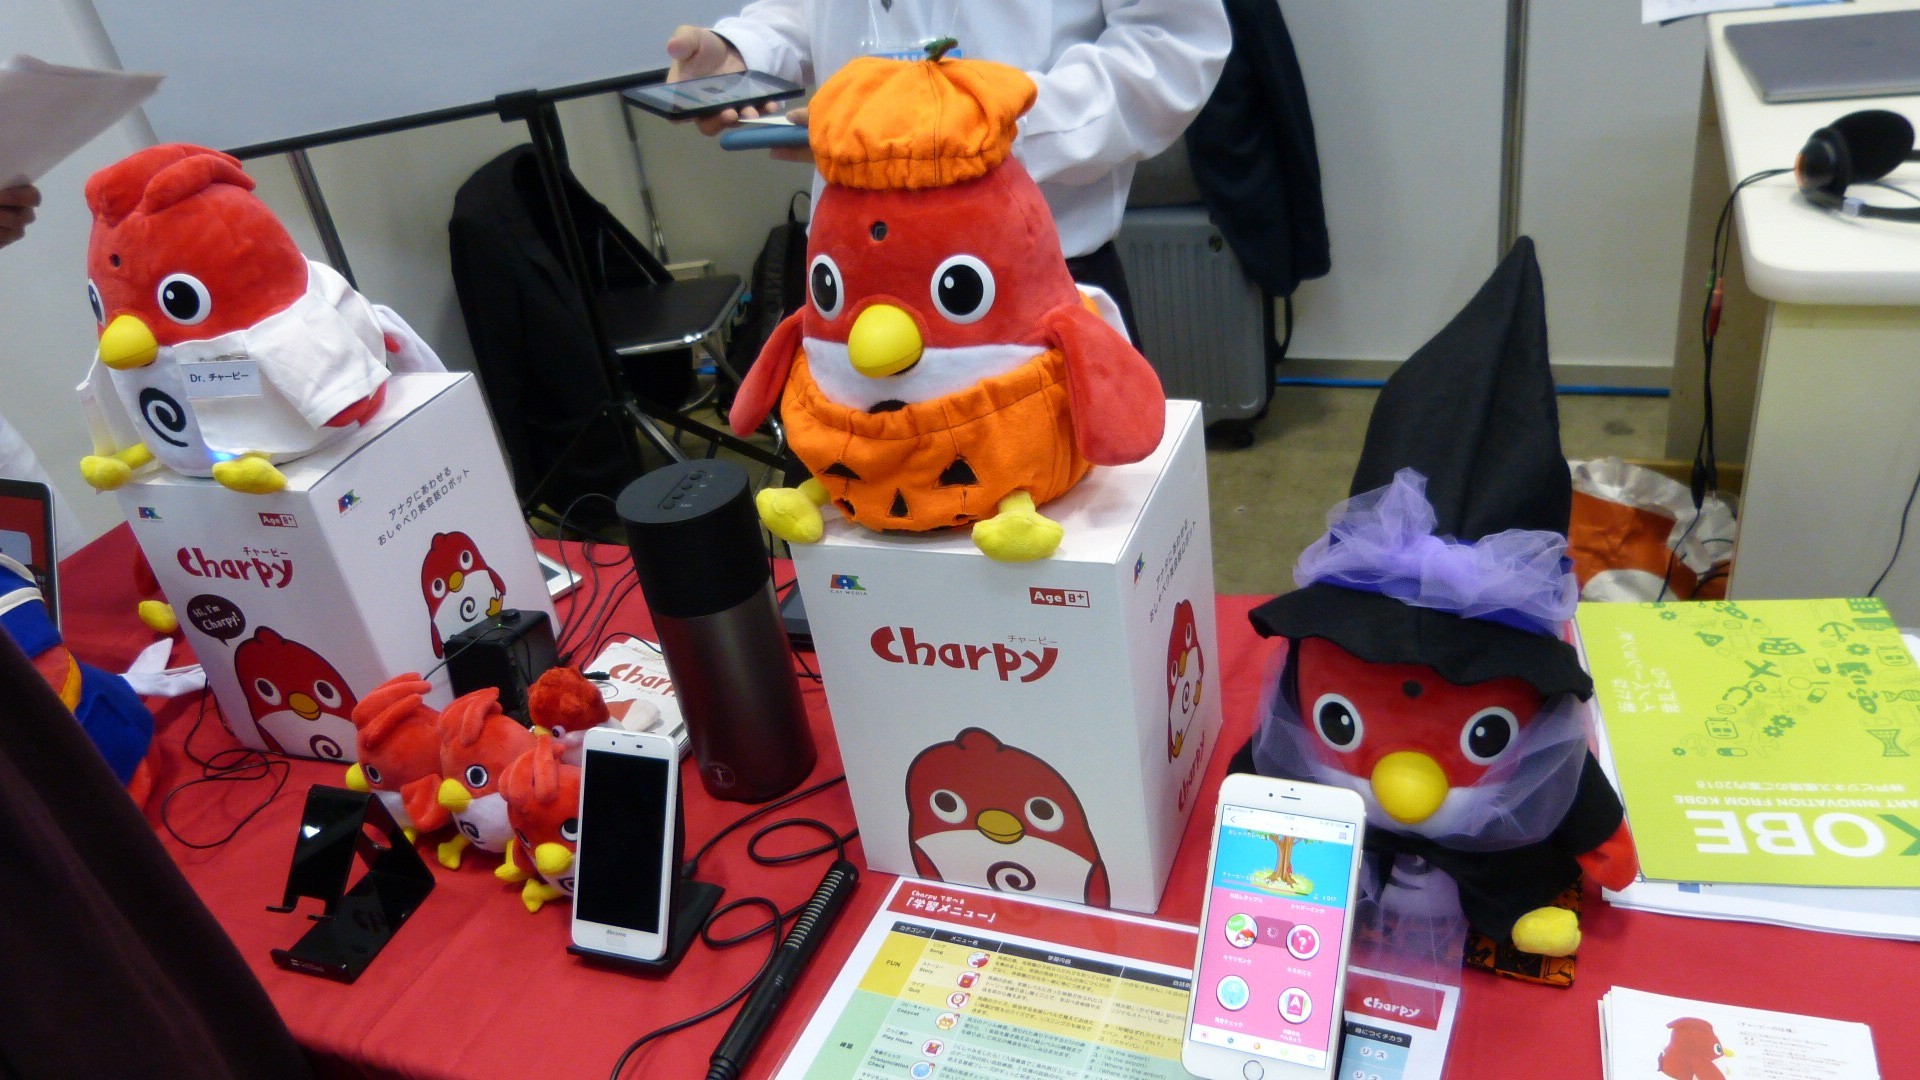 several Charpy toy robot birds with their boxes and some smartphones.  one toy is dressed as a jack-o-lantern and another is dressed as a witch for halloween